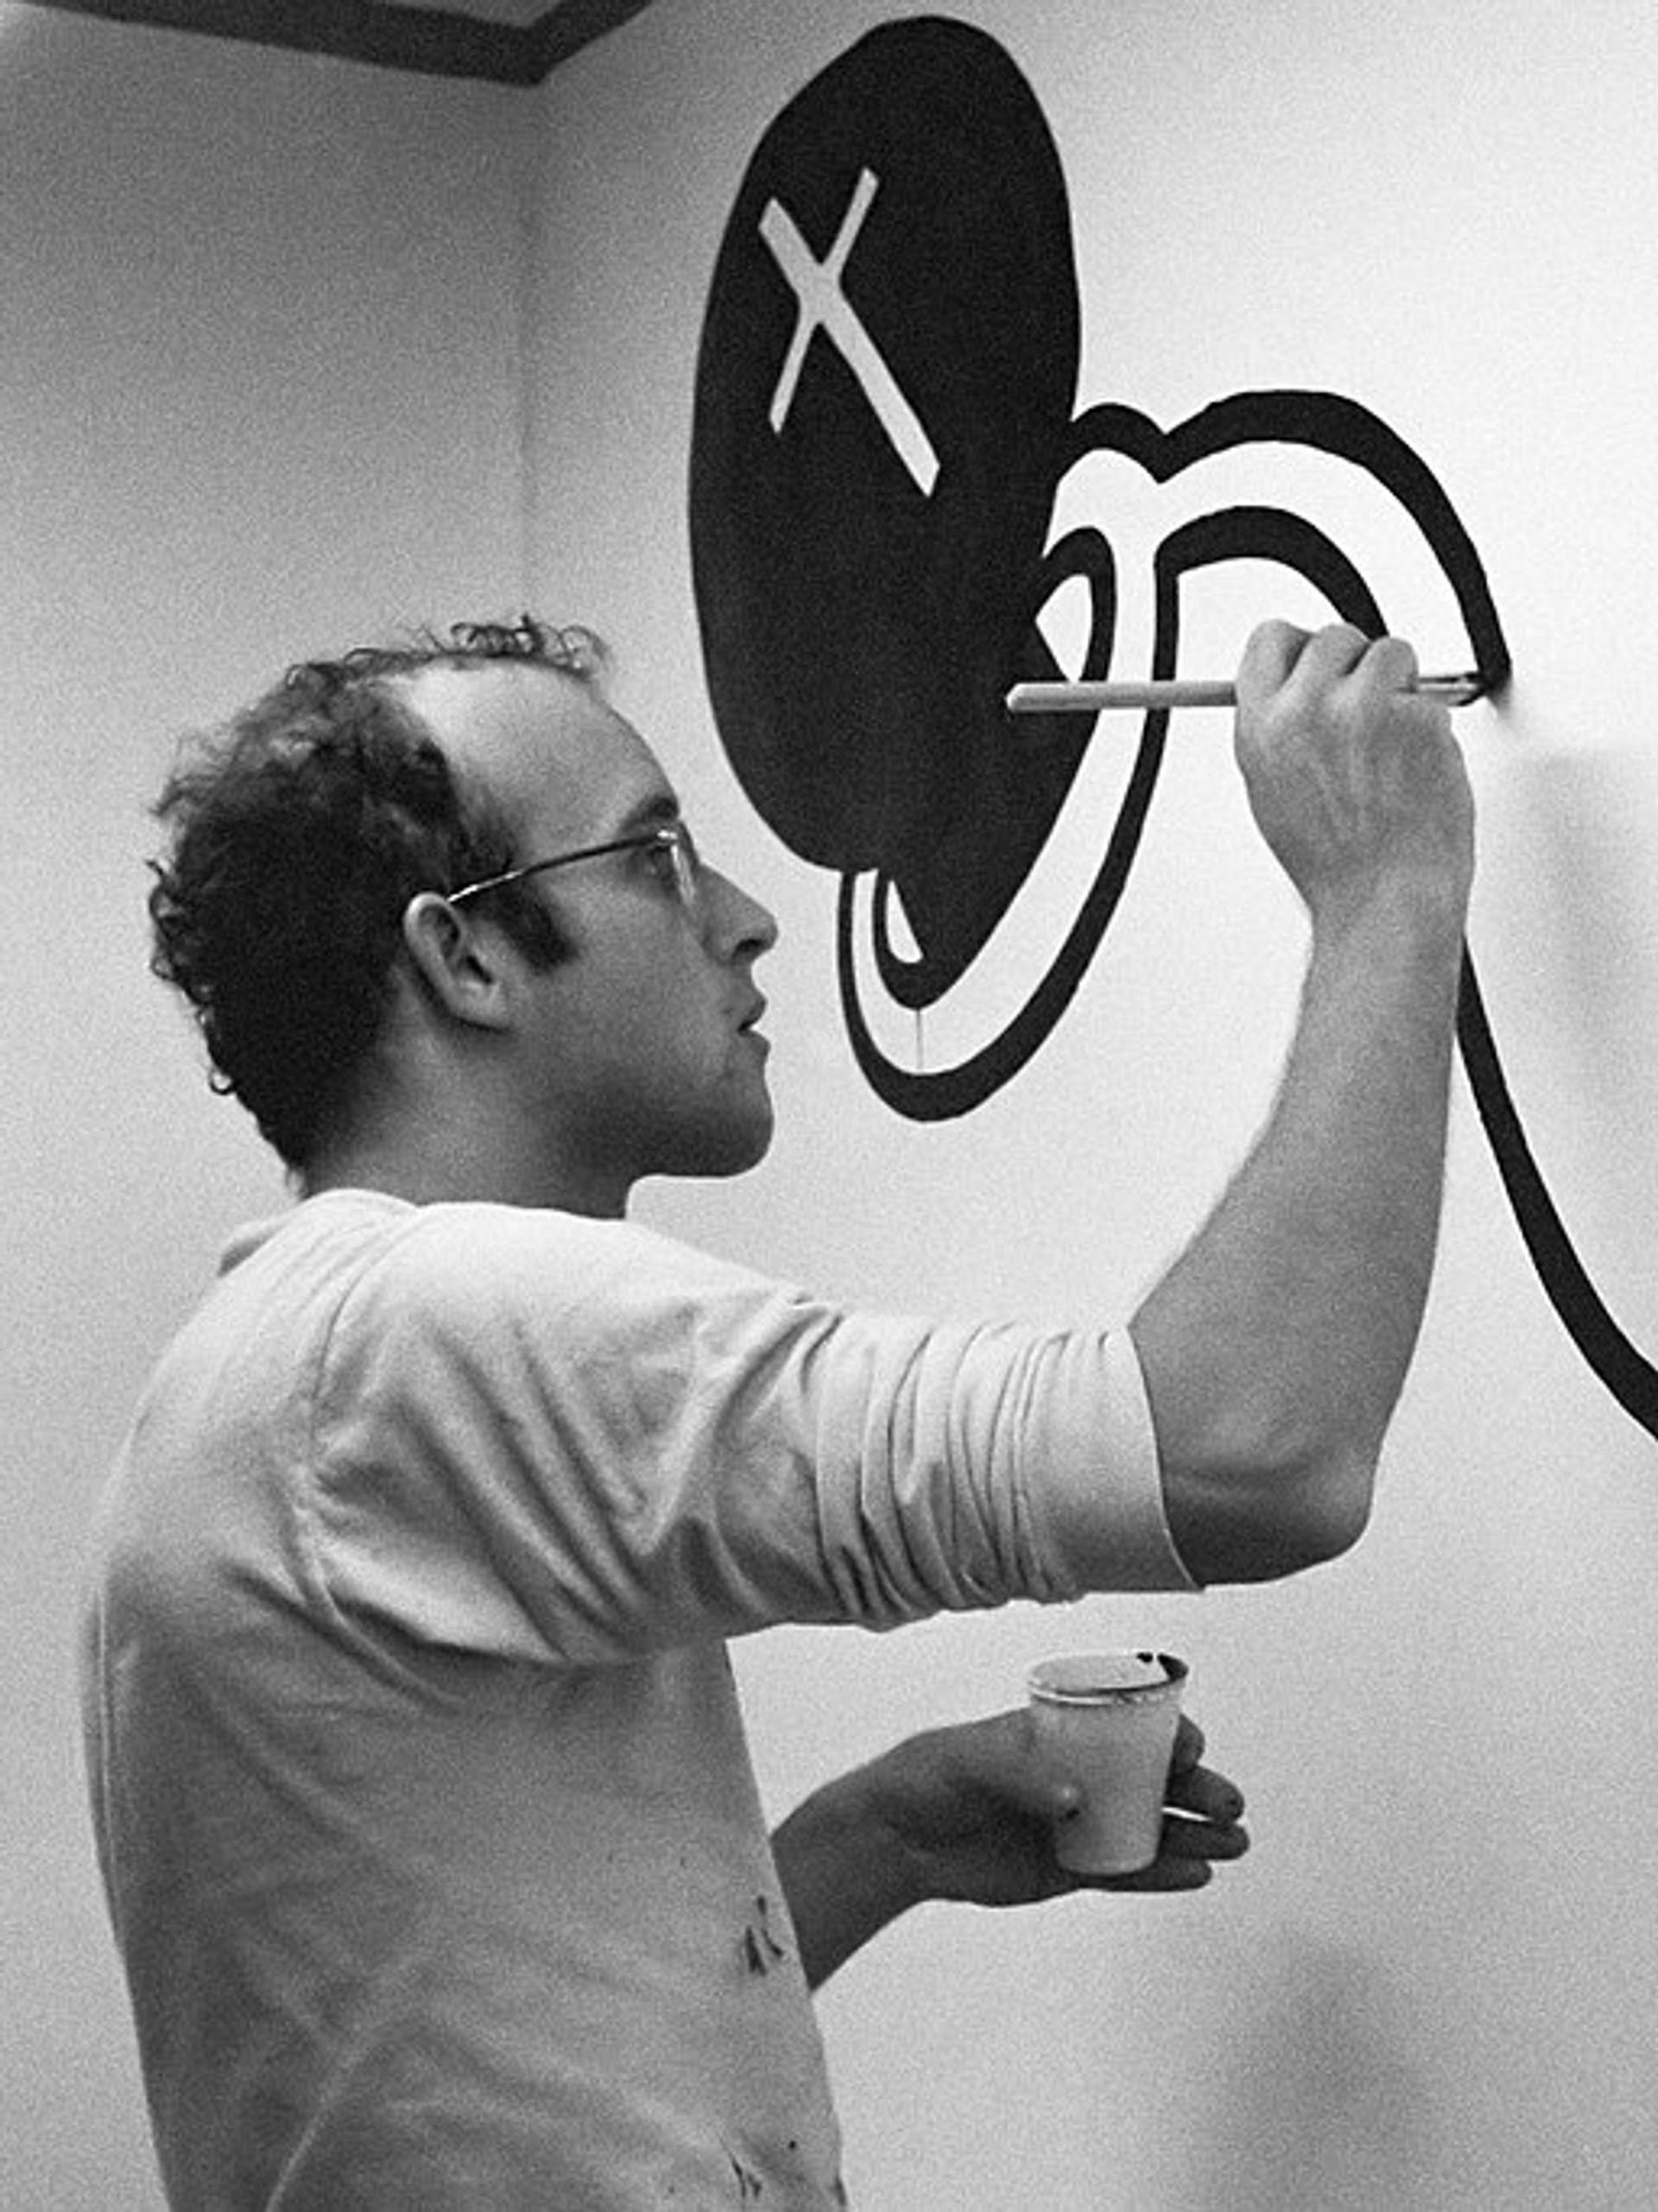 Why Keith Haring's Legacy Is so Important